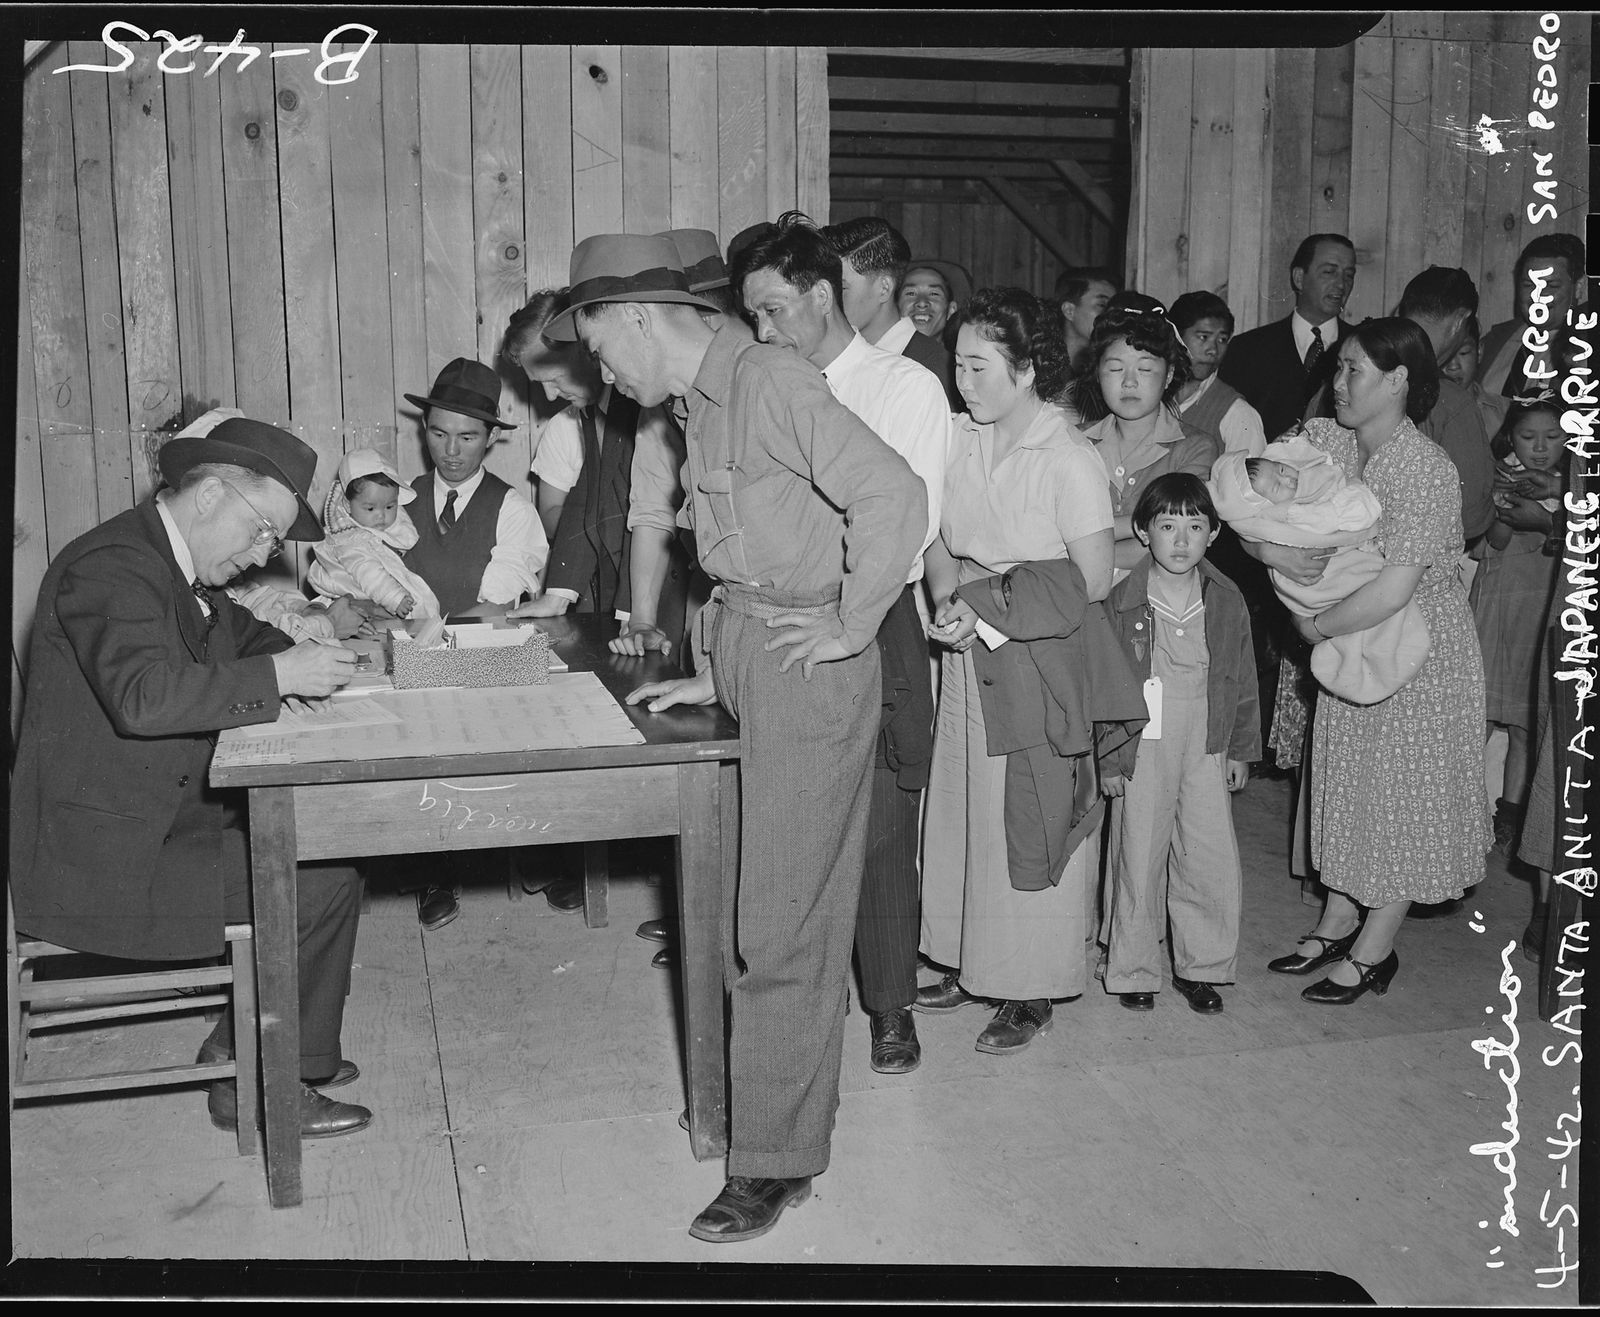 The Public Finally Has Access to an Accurate List of Japanese Americans Detained During World War II | Smart News [Video]